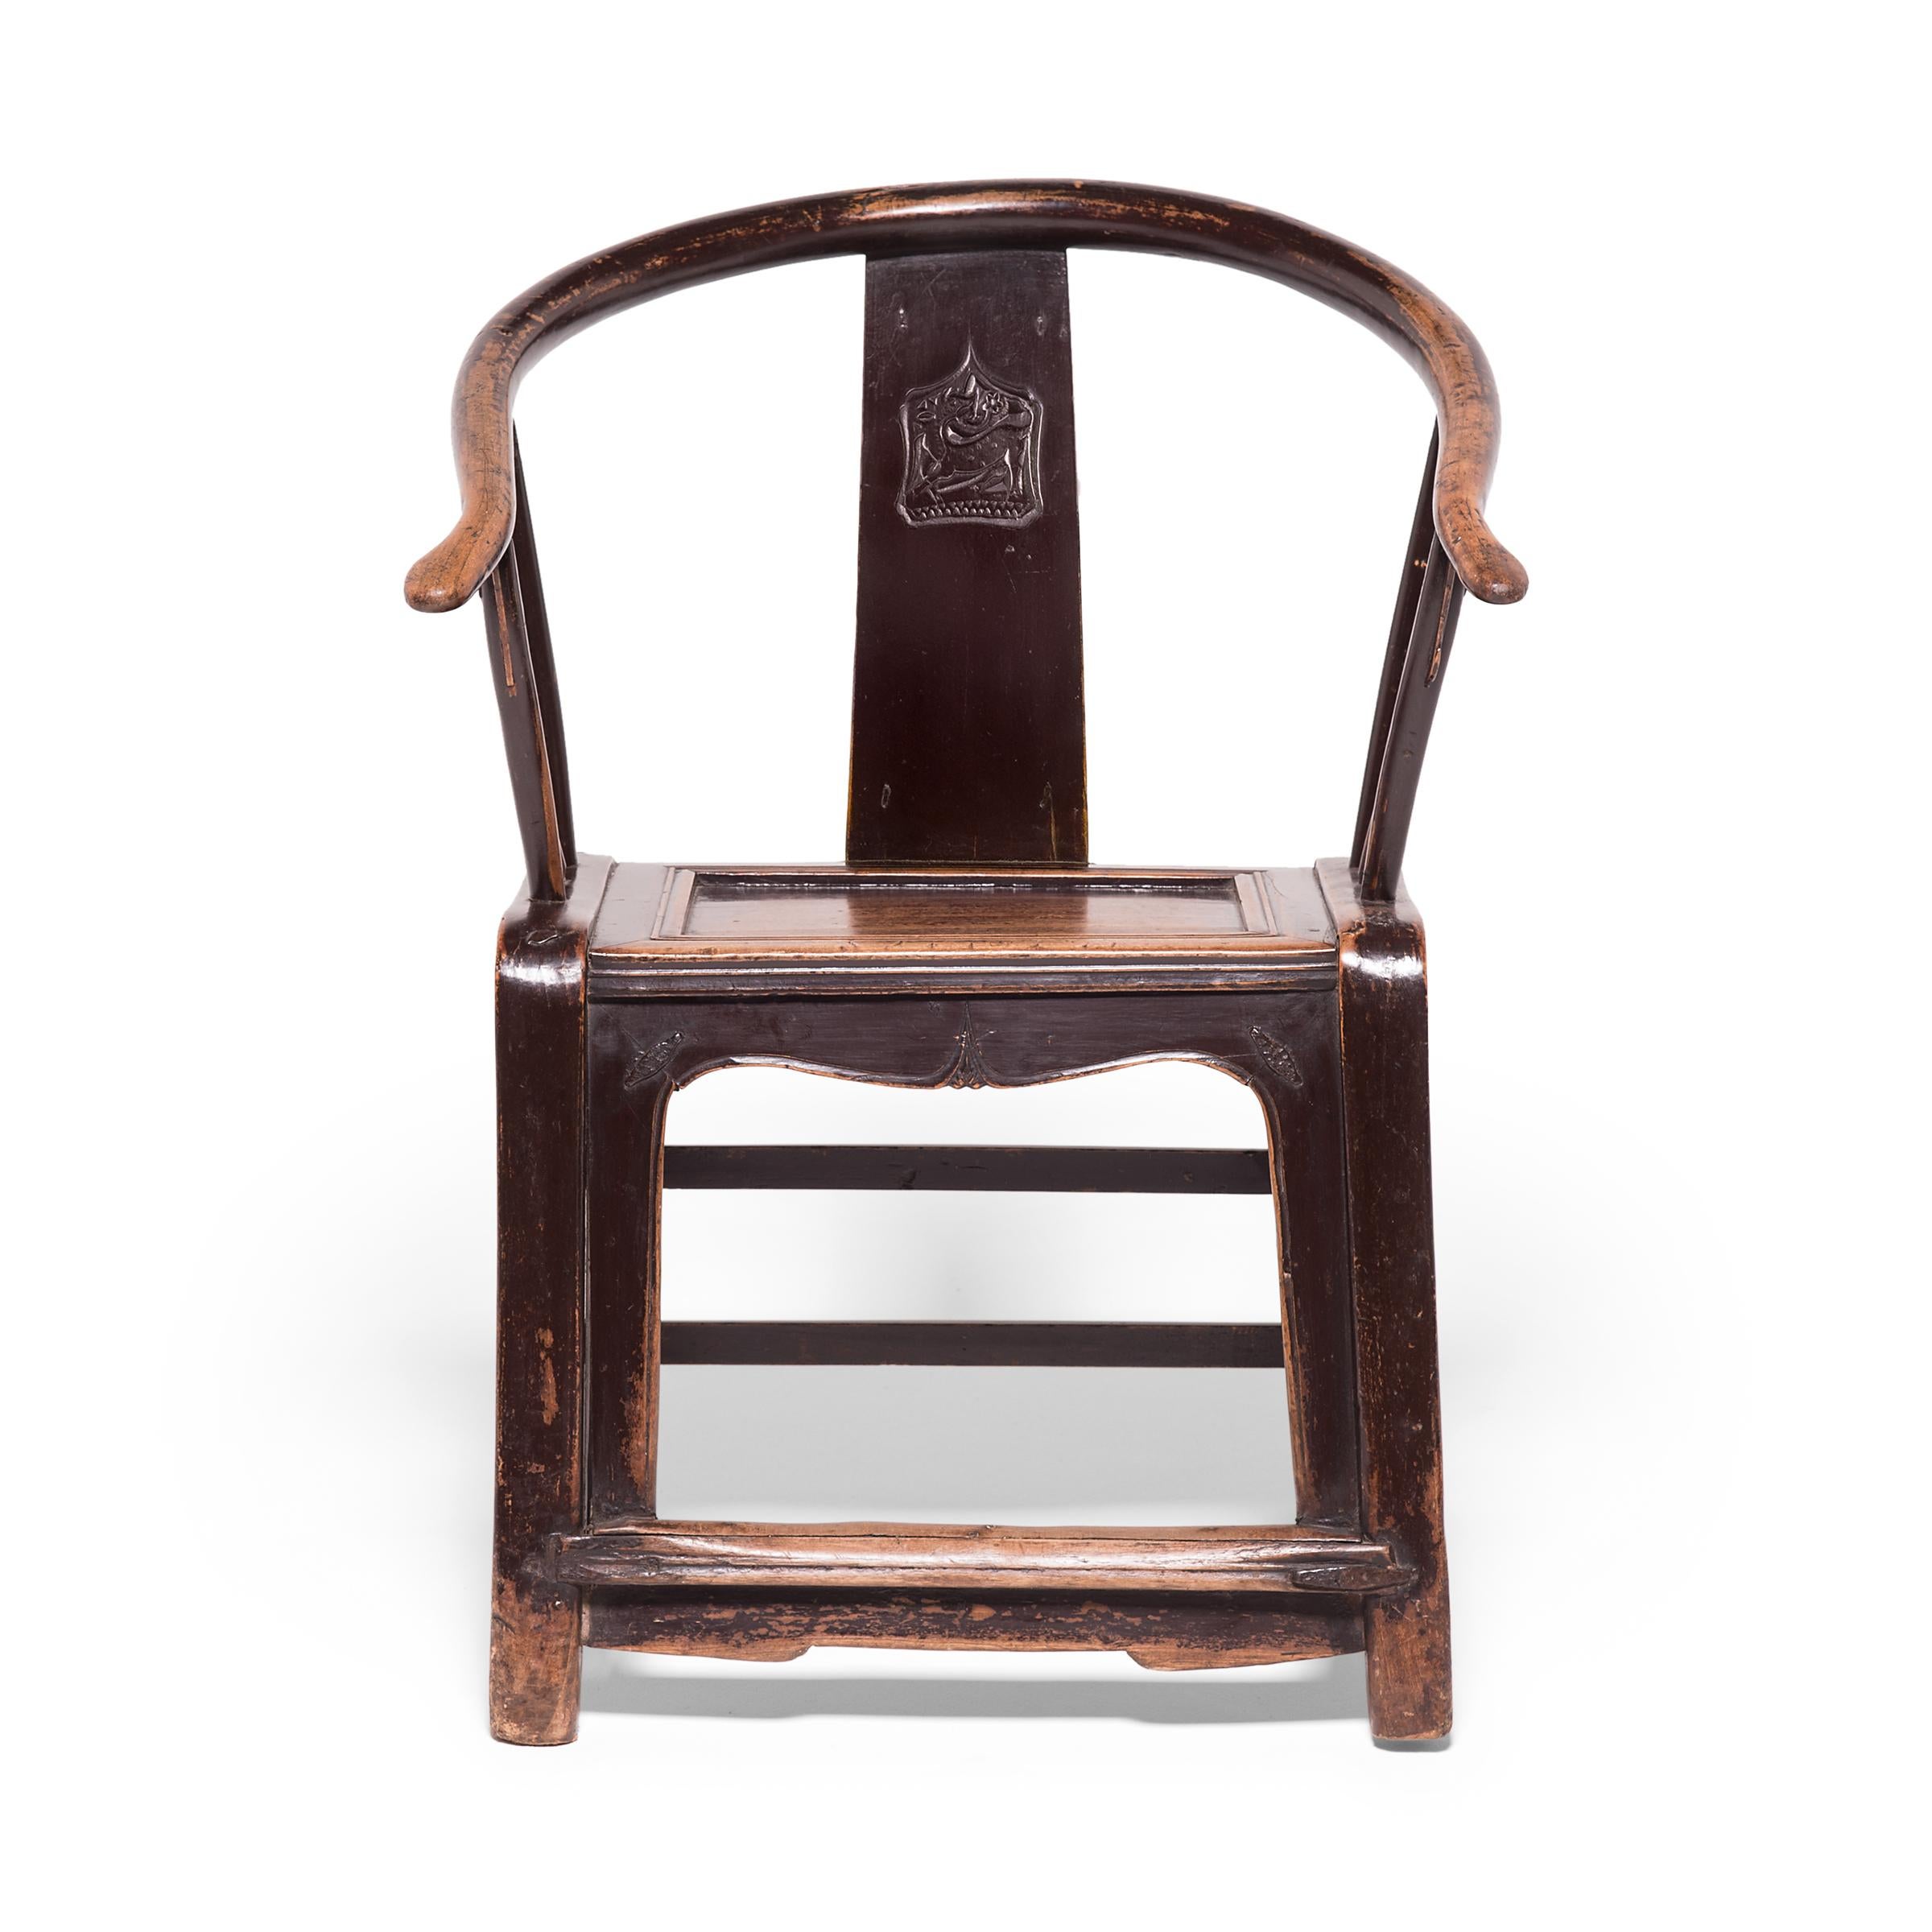 For these elegant 19th-century elmwood chairs, the devil—or deer, as it were, is in the details. Masterful mortise and tenon joinery defines the chairs' seamless end-to-end construction, and their round backs were achieved through a centuries old